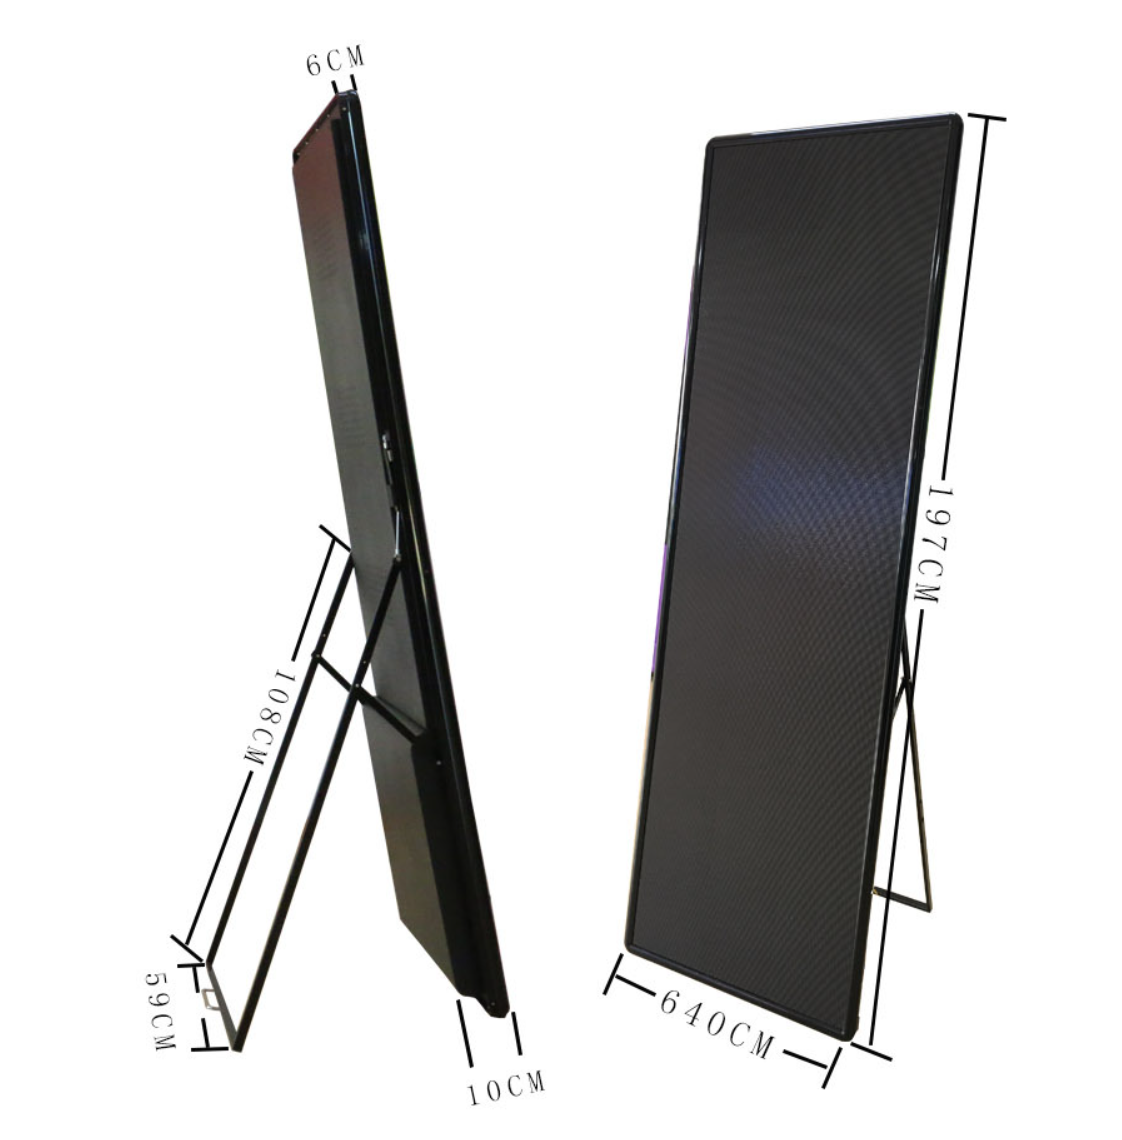 Mirror led display light and thin